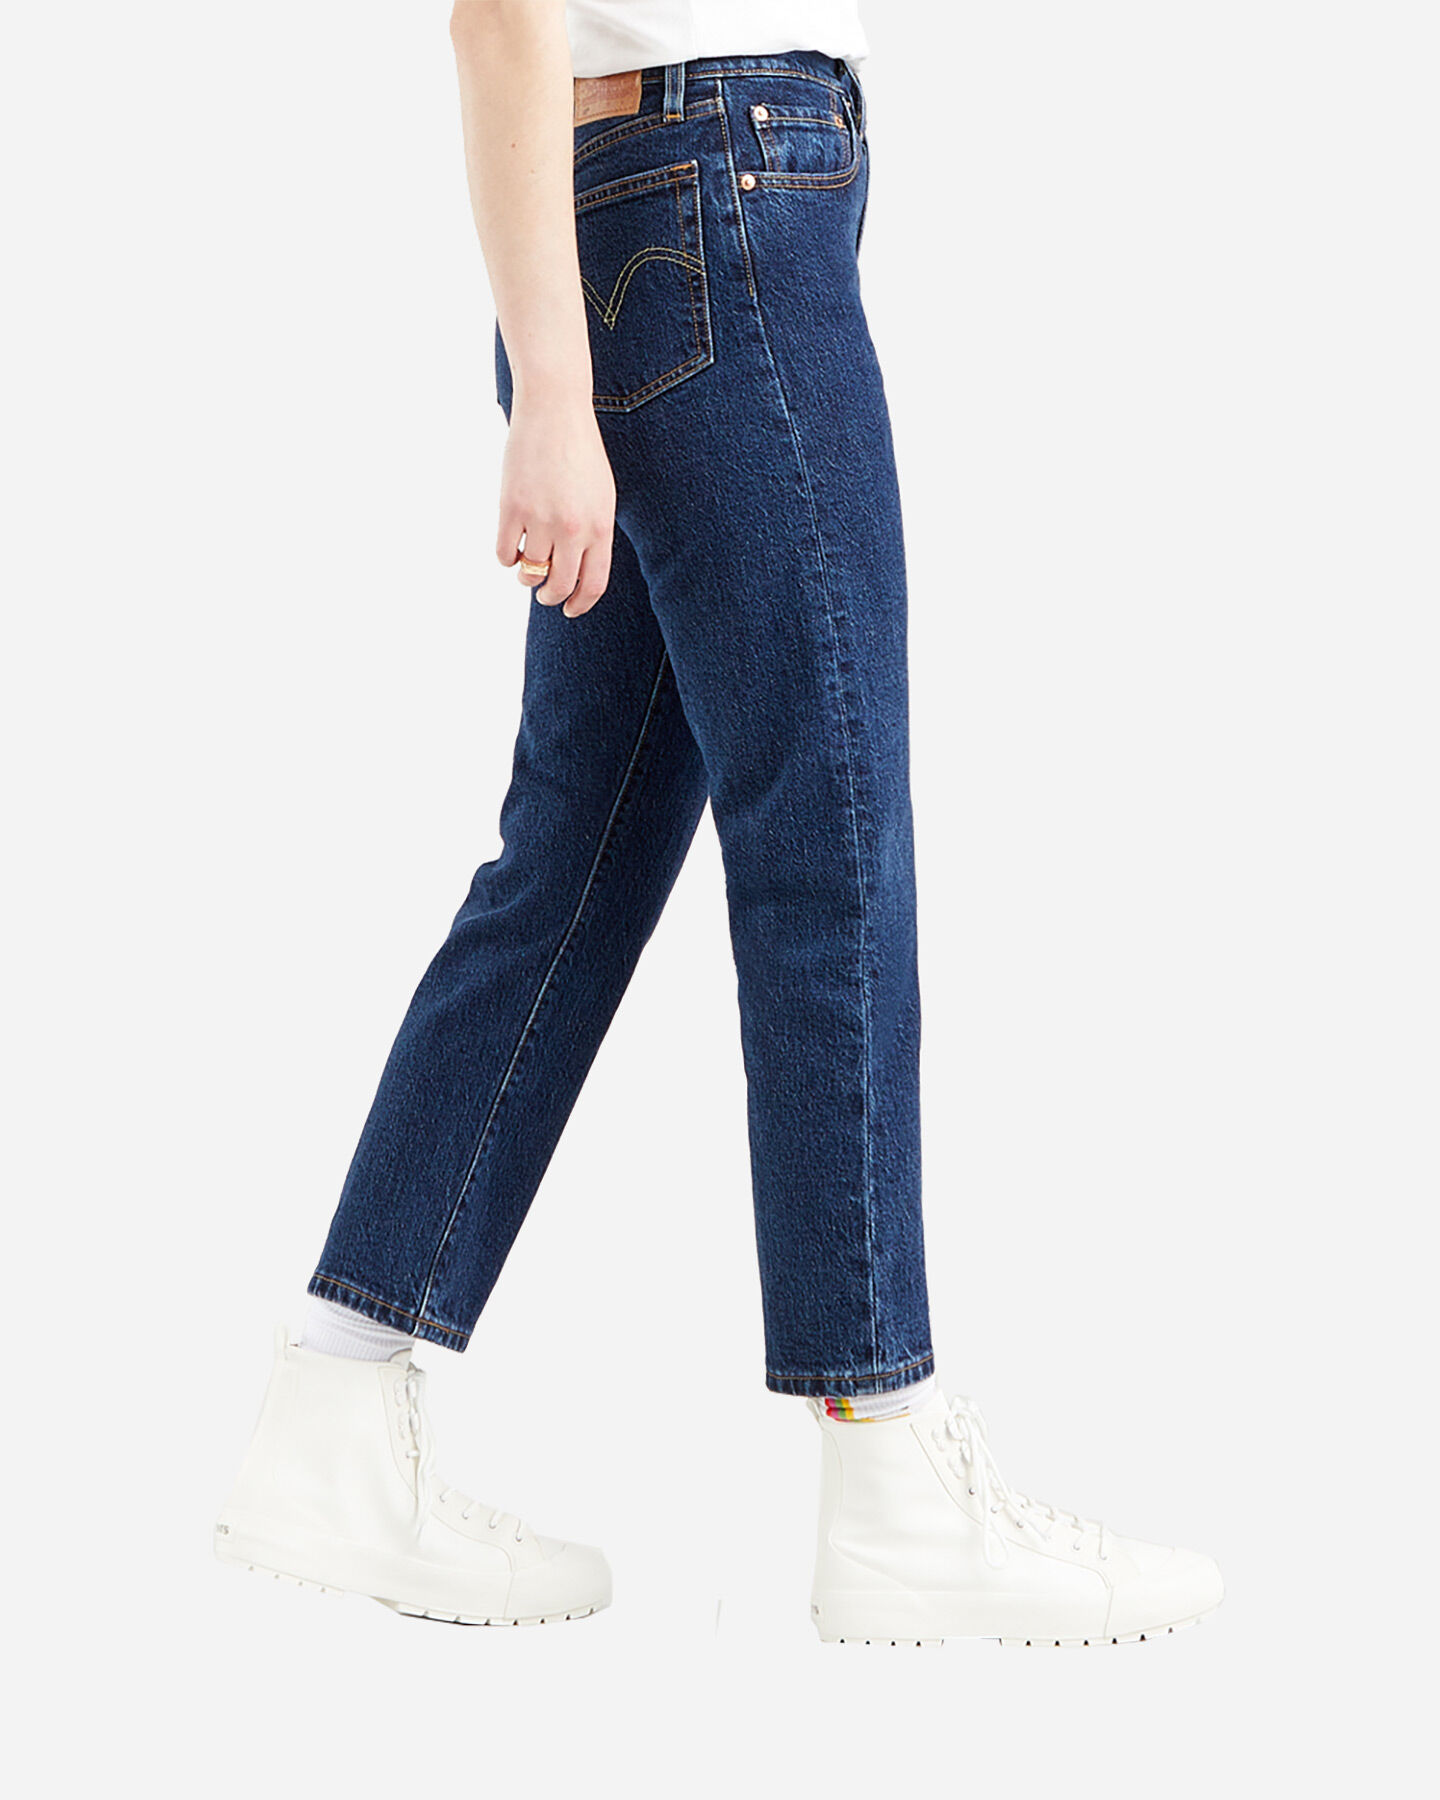  Jeans LEVI'S 501 CROP W S4097261|0179|29 scatto 1